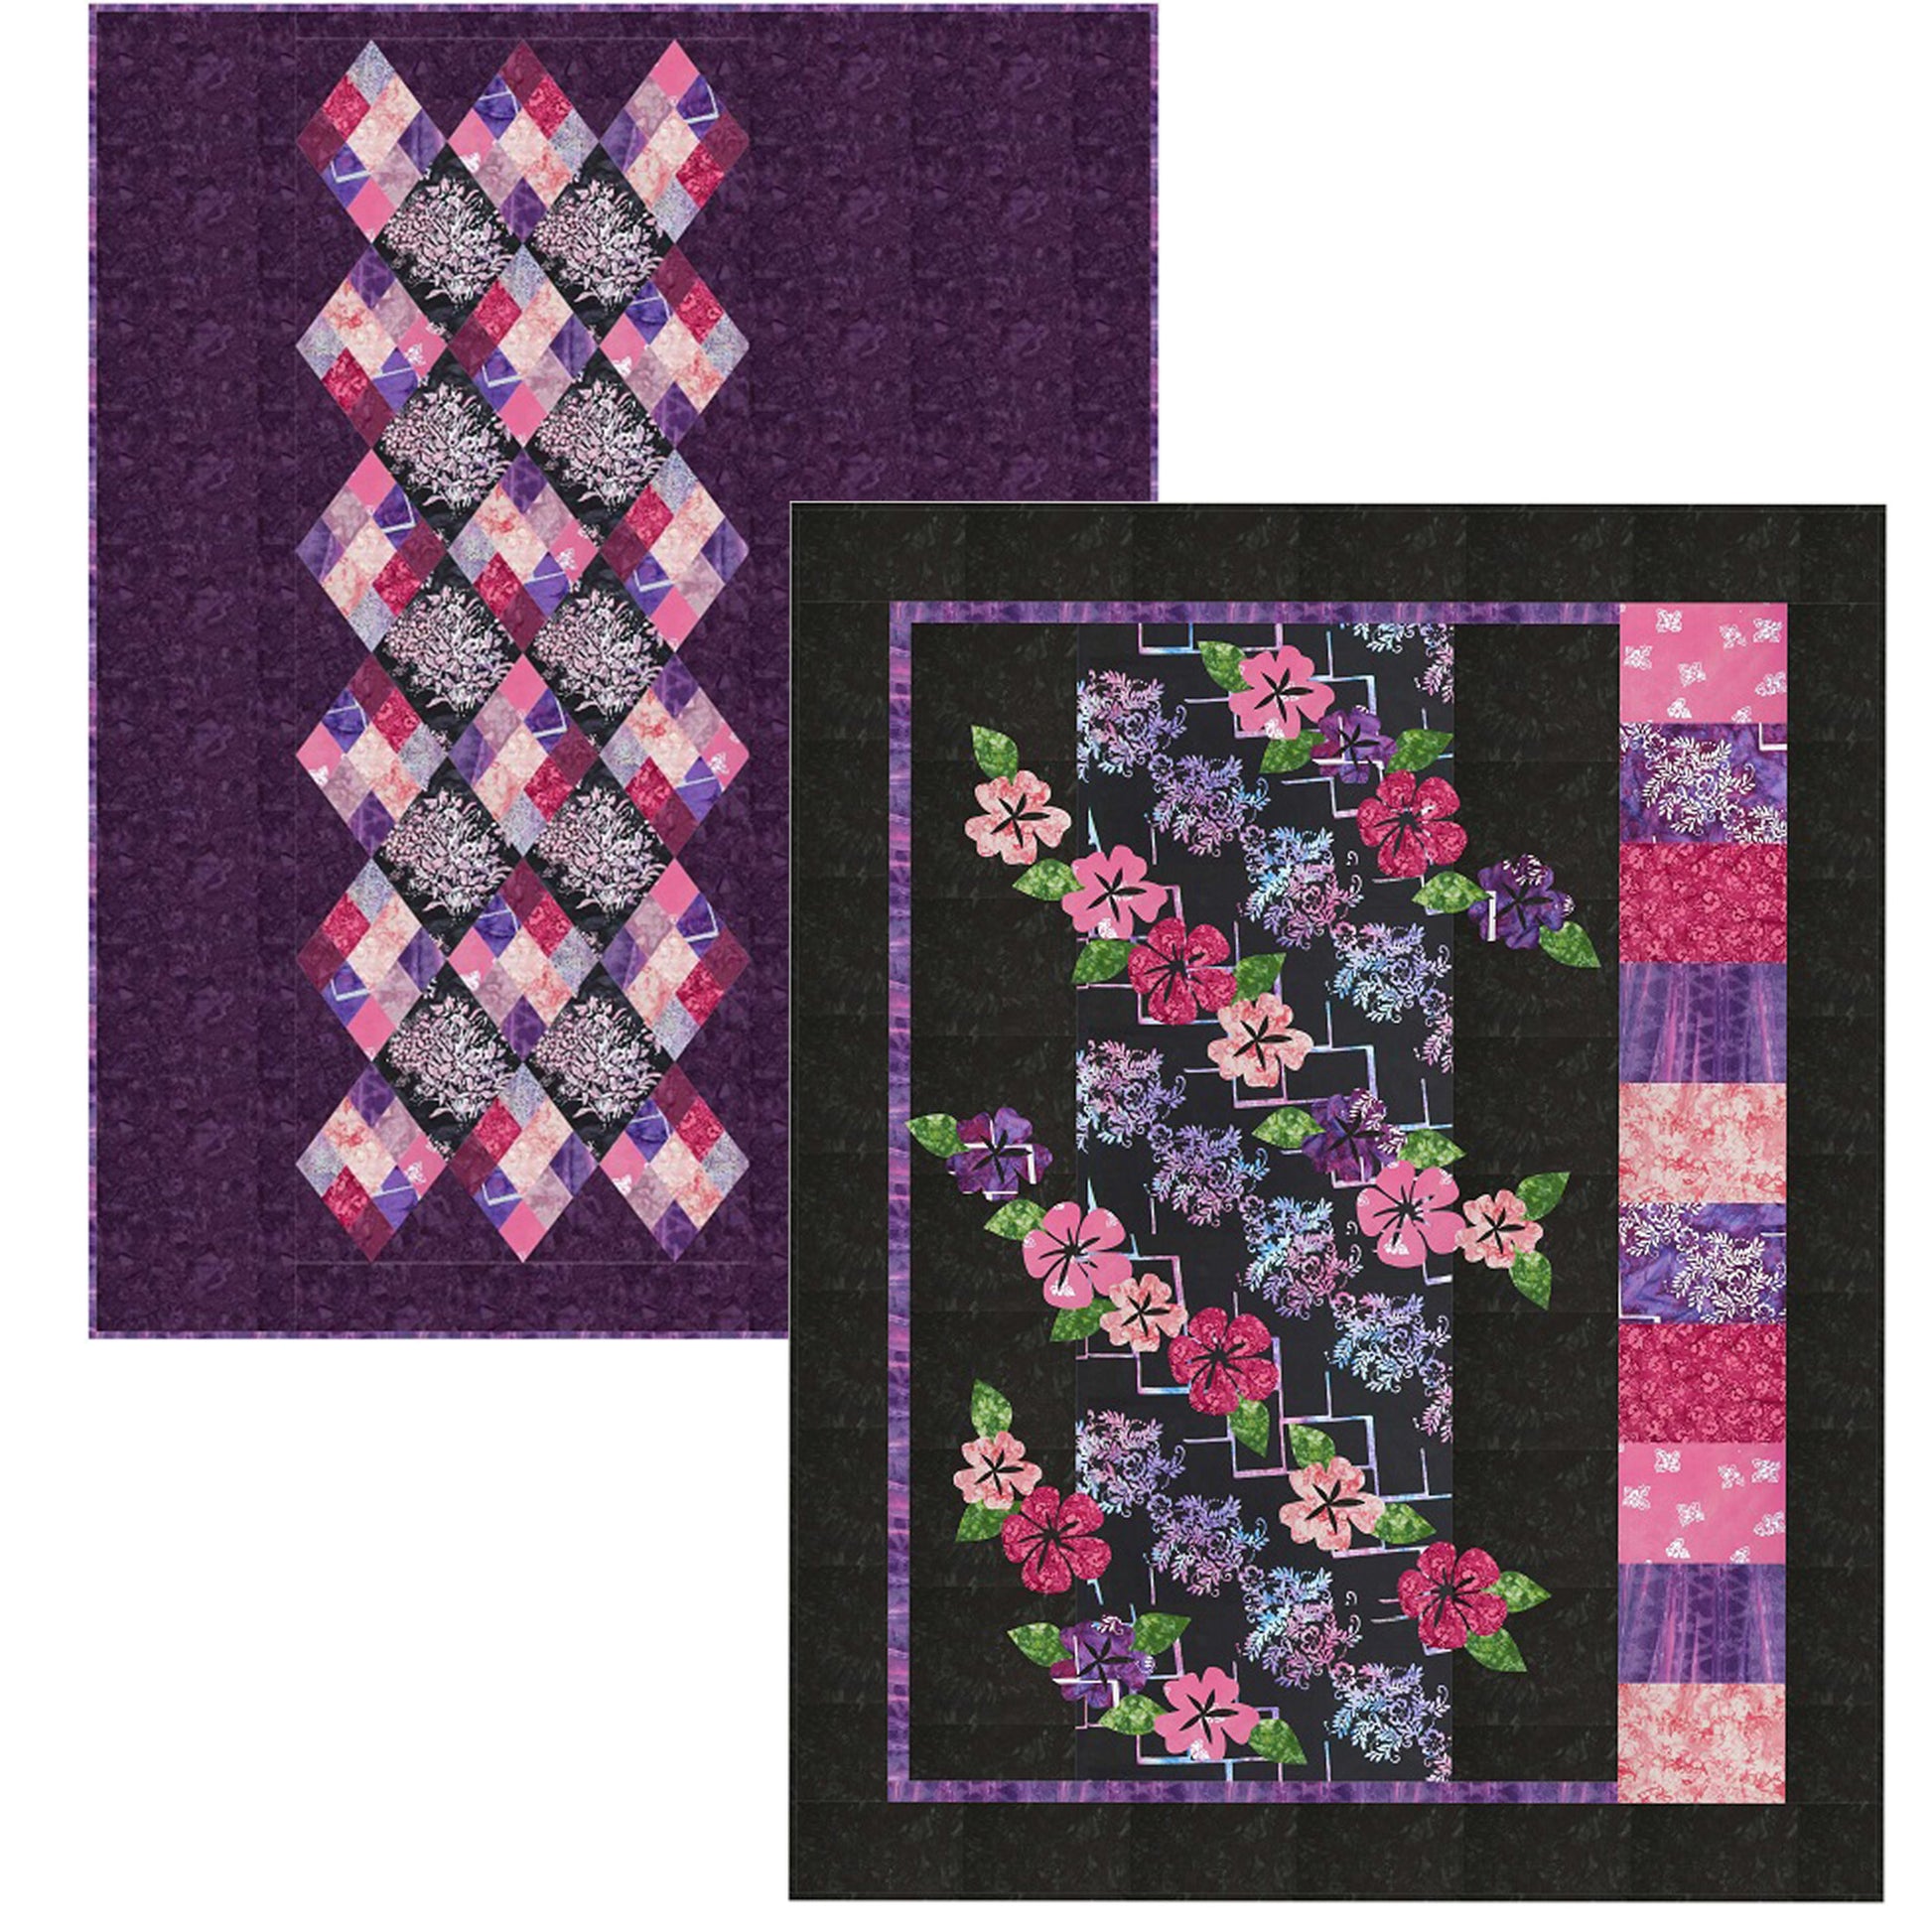 2 Quilts shown.  On left is: Colorful quilt with purple and pink diamond pattern on a purple background.  On right is: Floral quilt with appliqued flowers in pinks and purple over a lattice fabric with bright colored blocks to the right which all pop because of black background color.